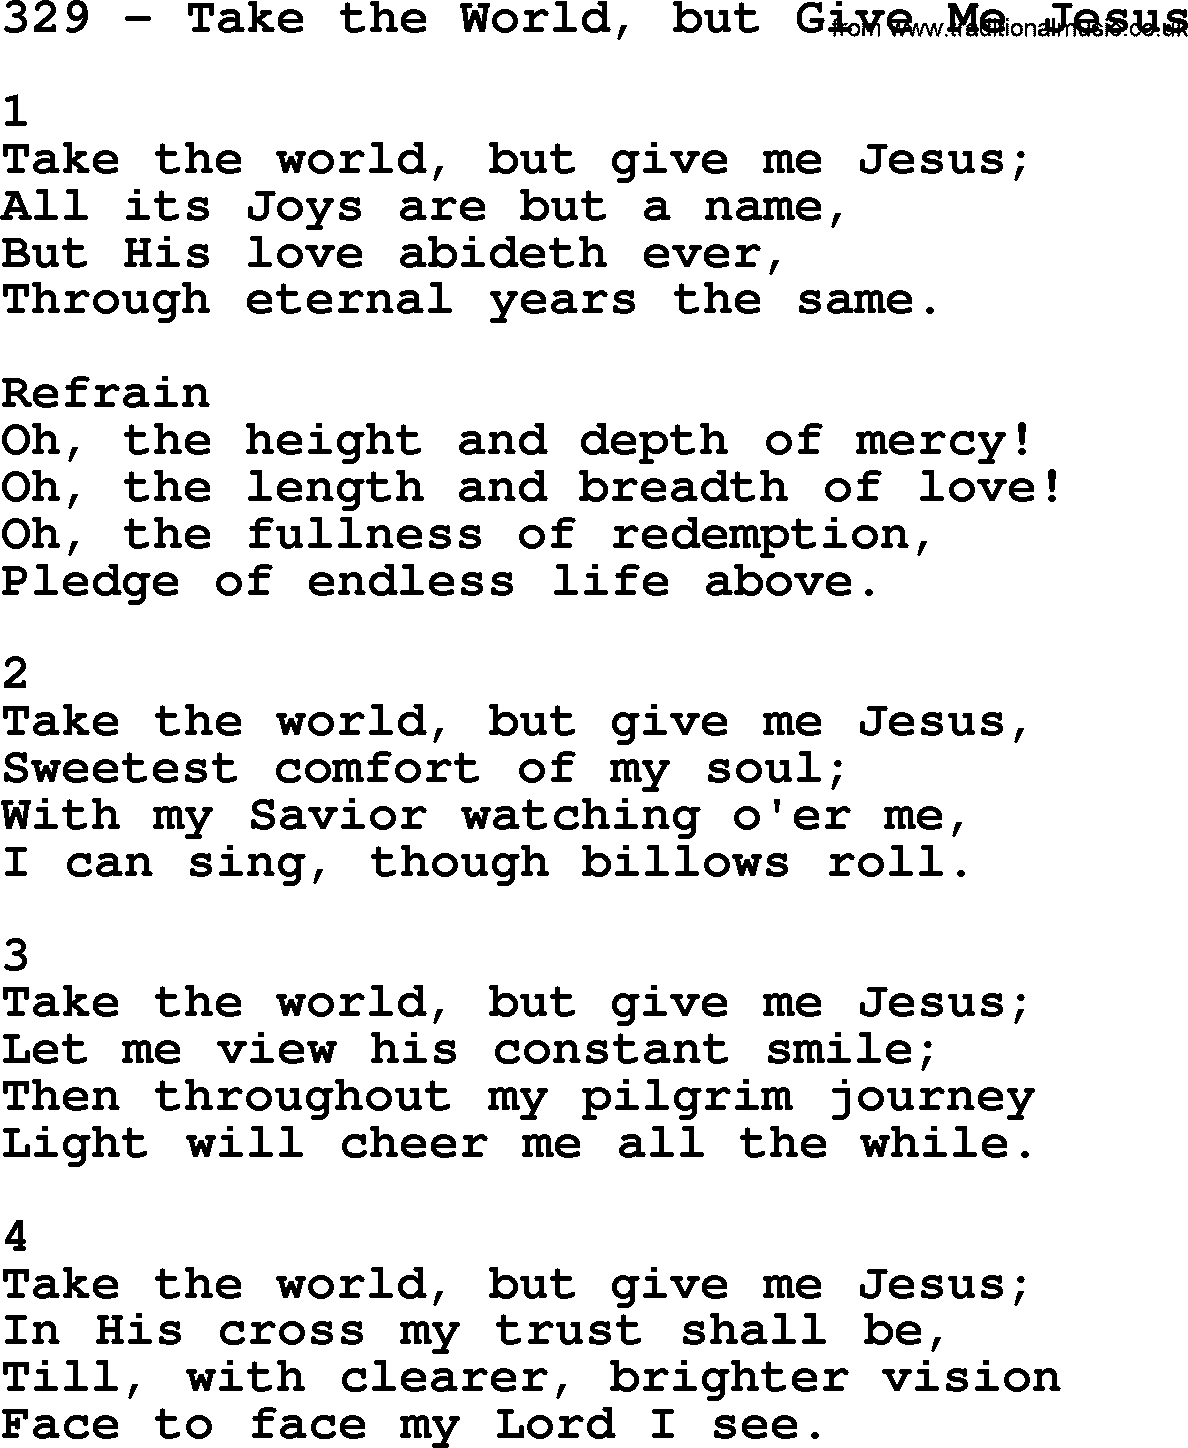 Complete Adventis Hymnal, title: 329-Take The World, But Give Me Jesus, with lyrics, midi, mp3, powerpoints(PPT) and PDF,